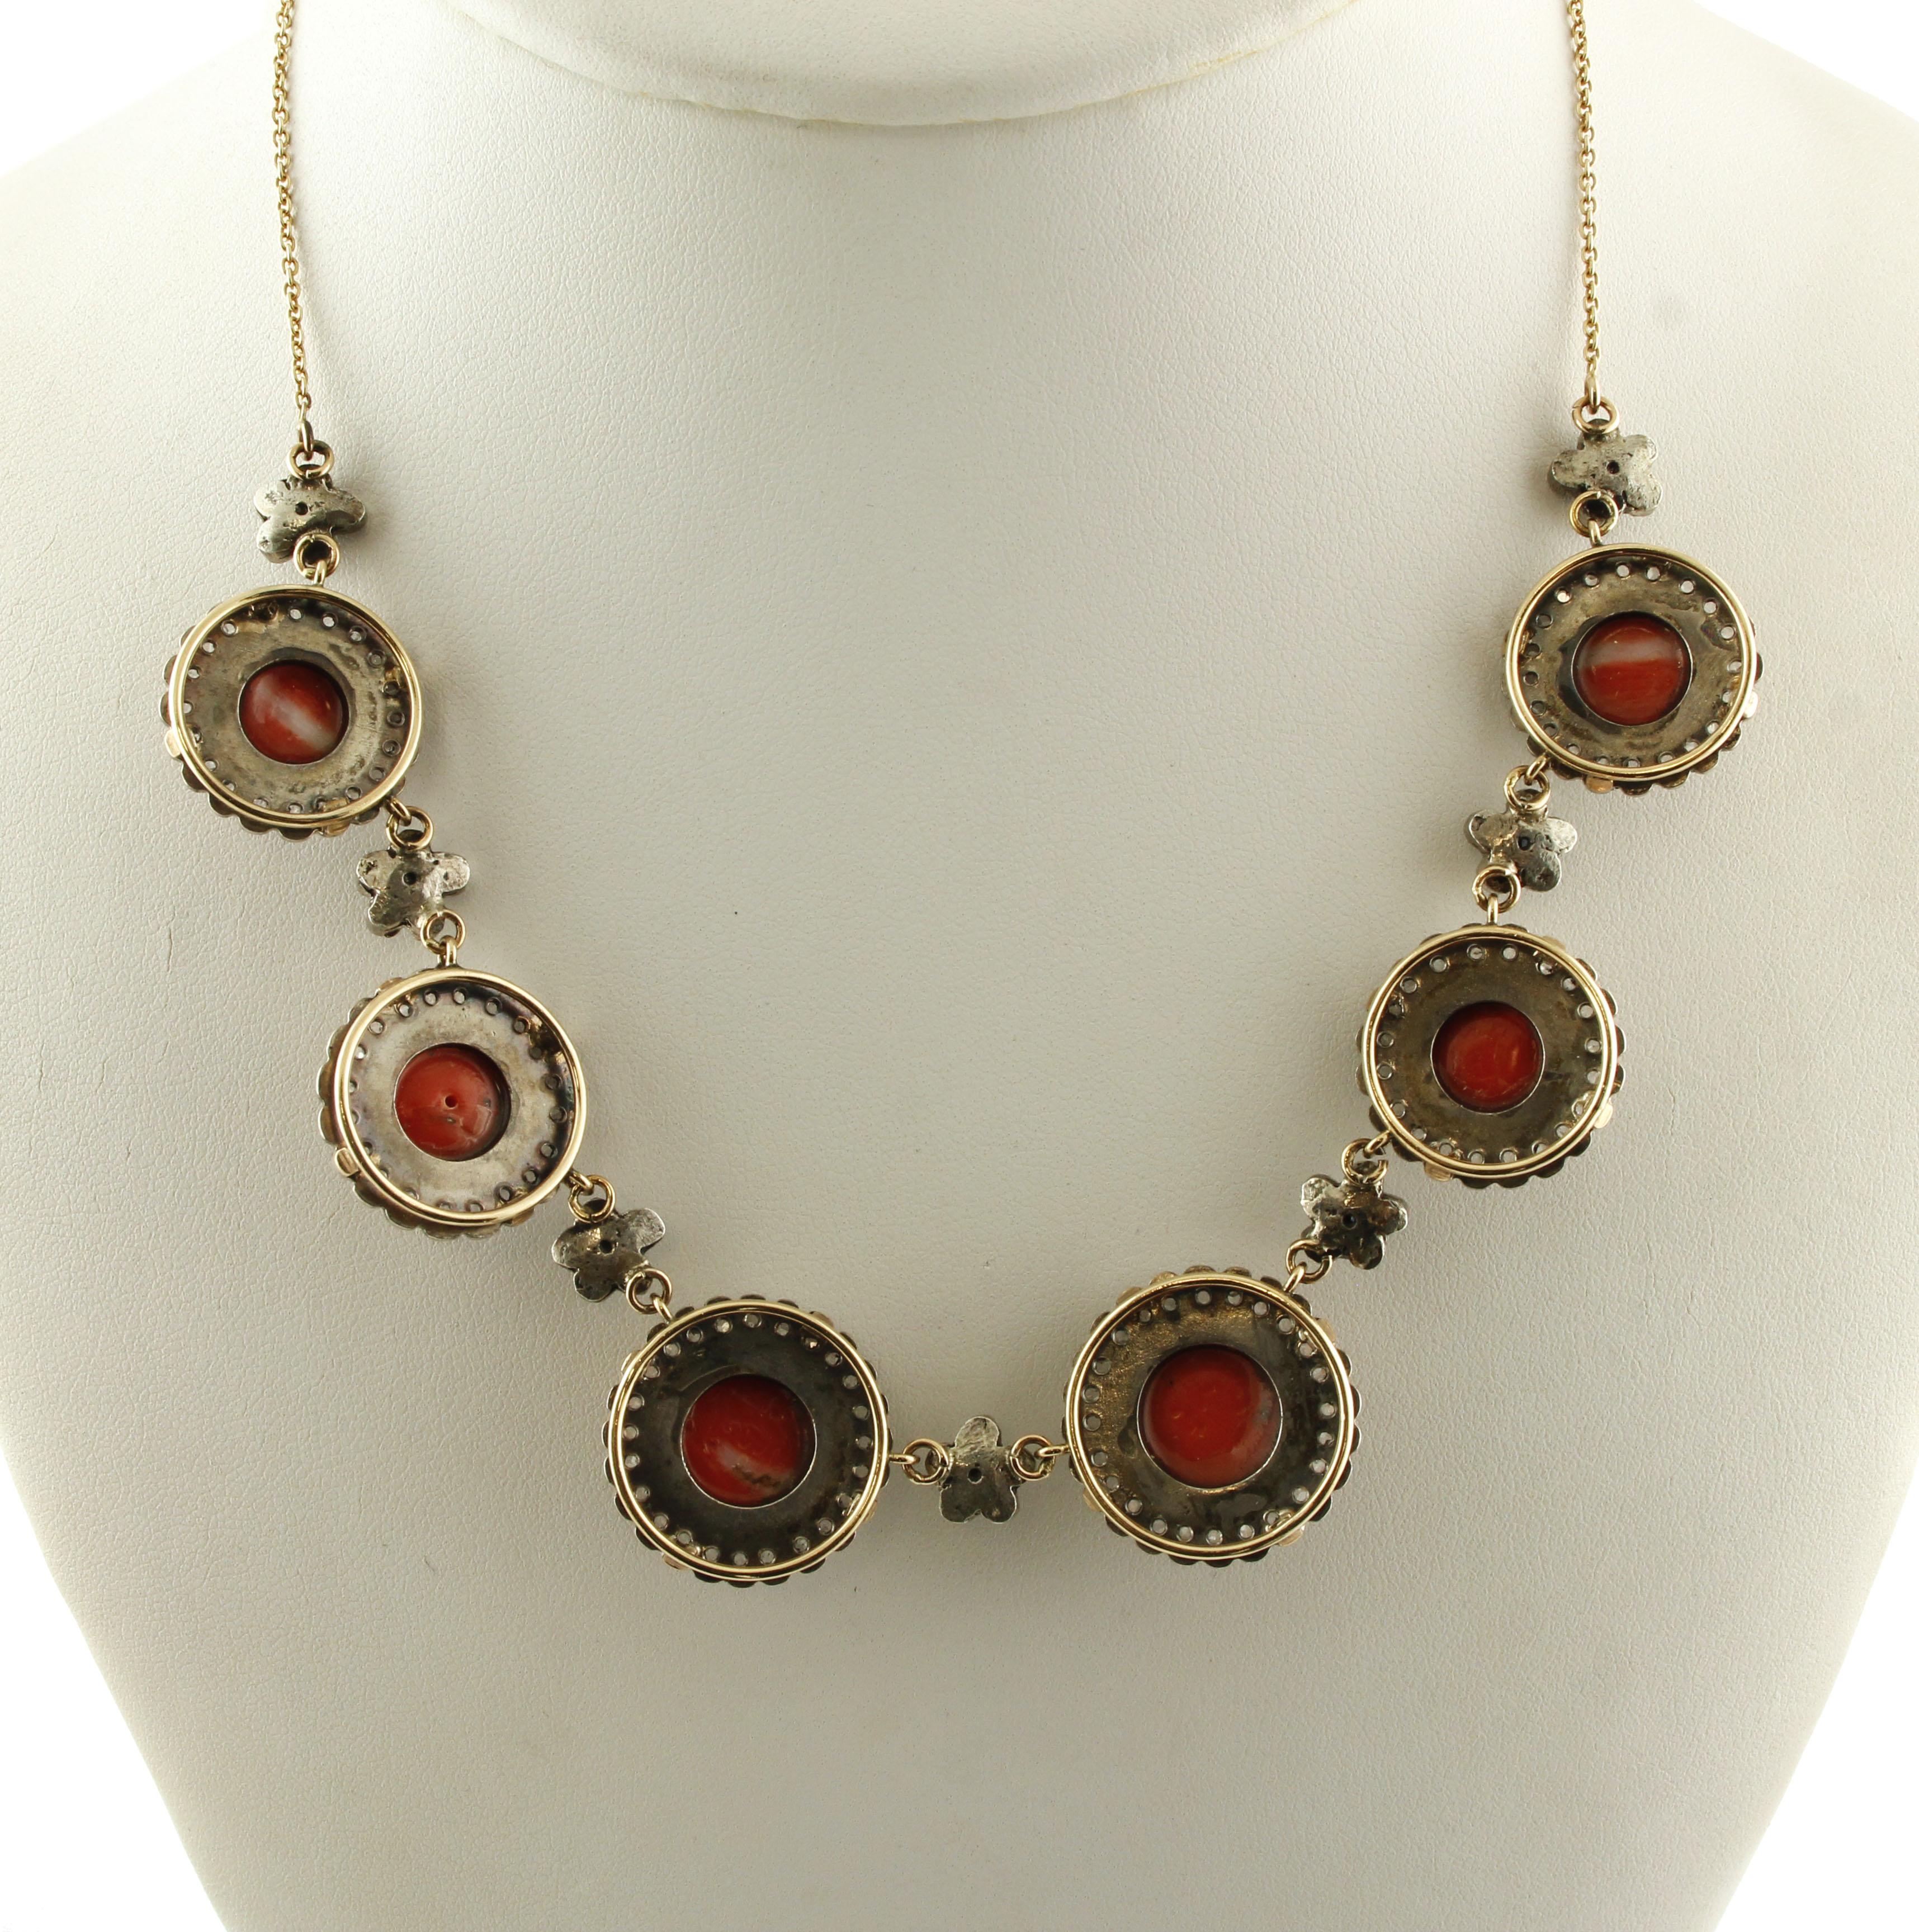 Retro Diamonds, Blue Sapphires, Red Coral Buttons Rose Gold and Silver Link Necklace